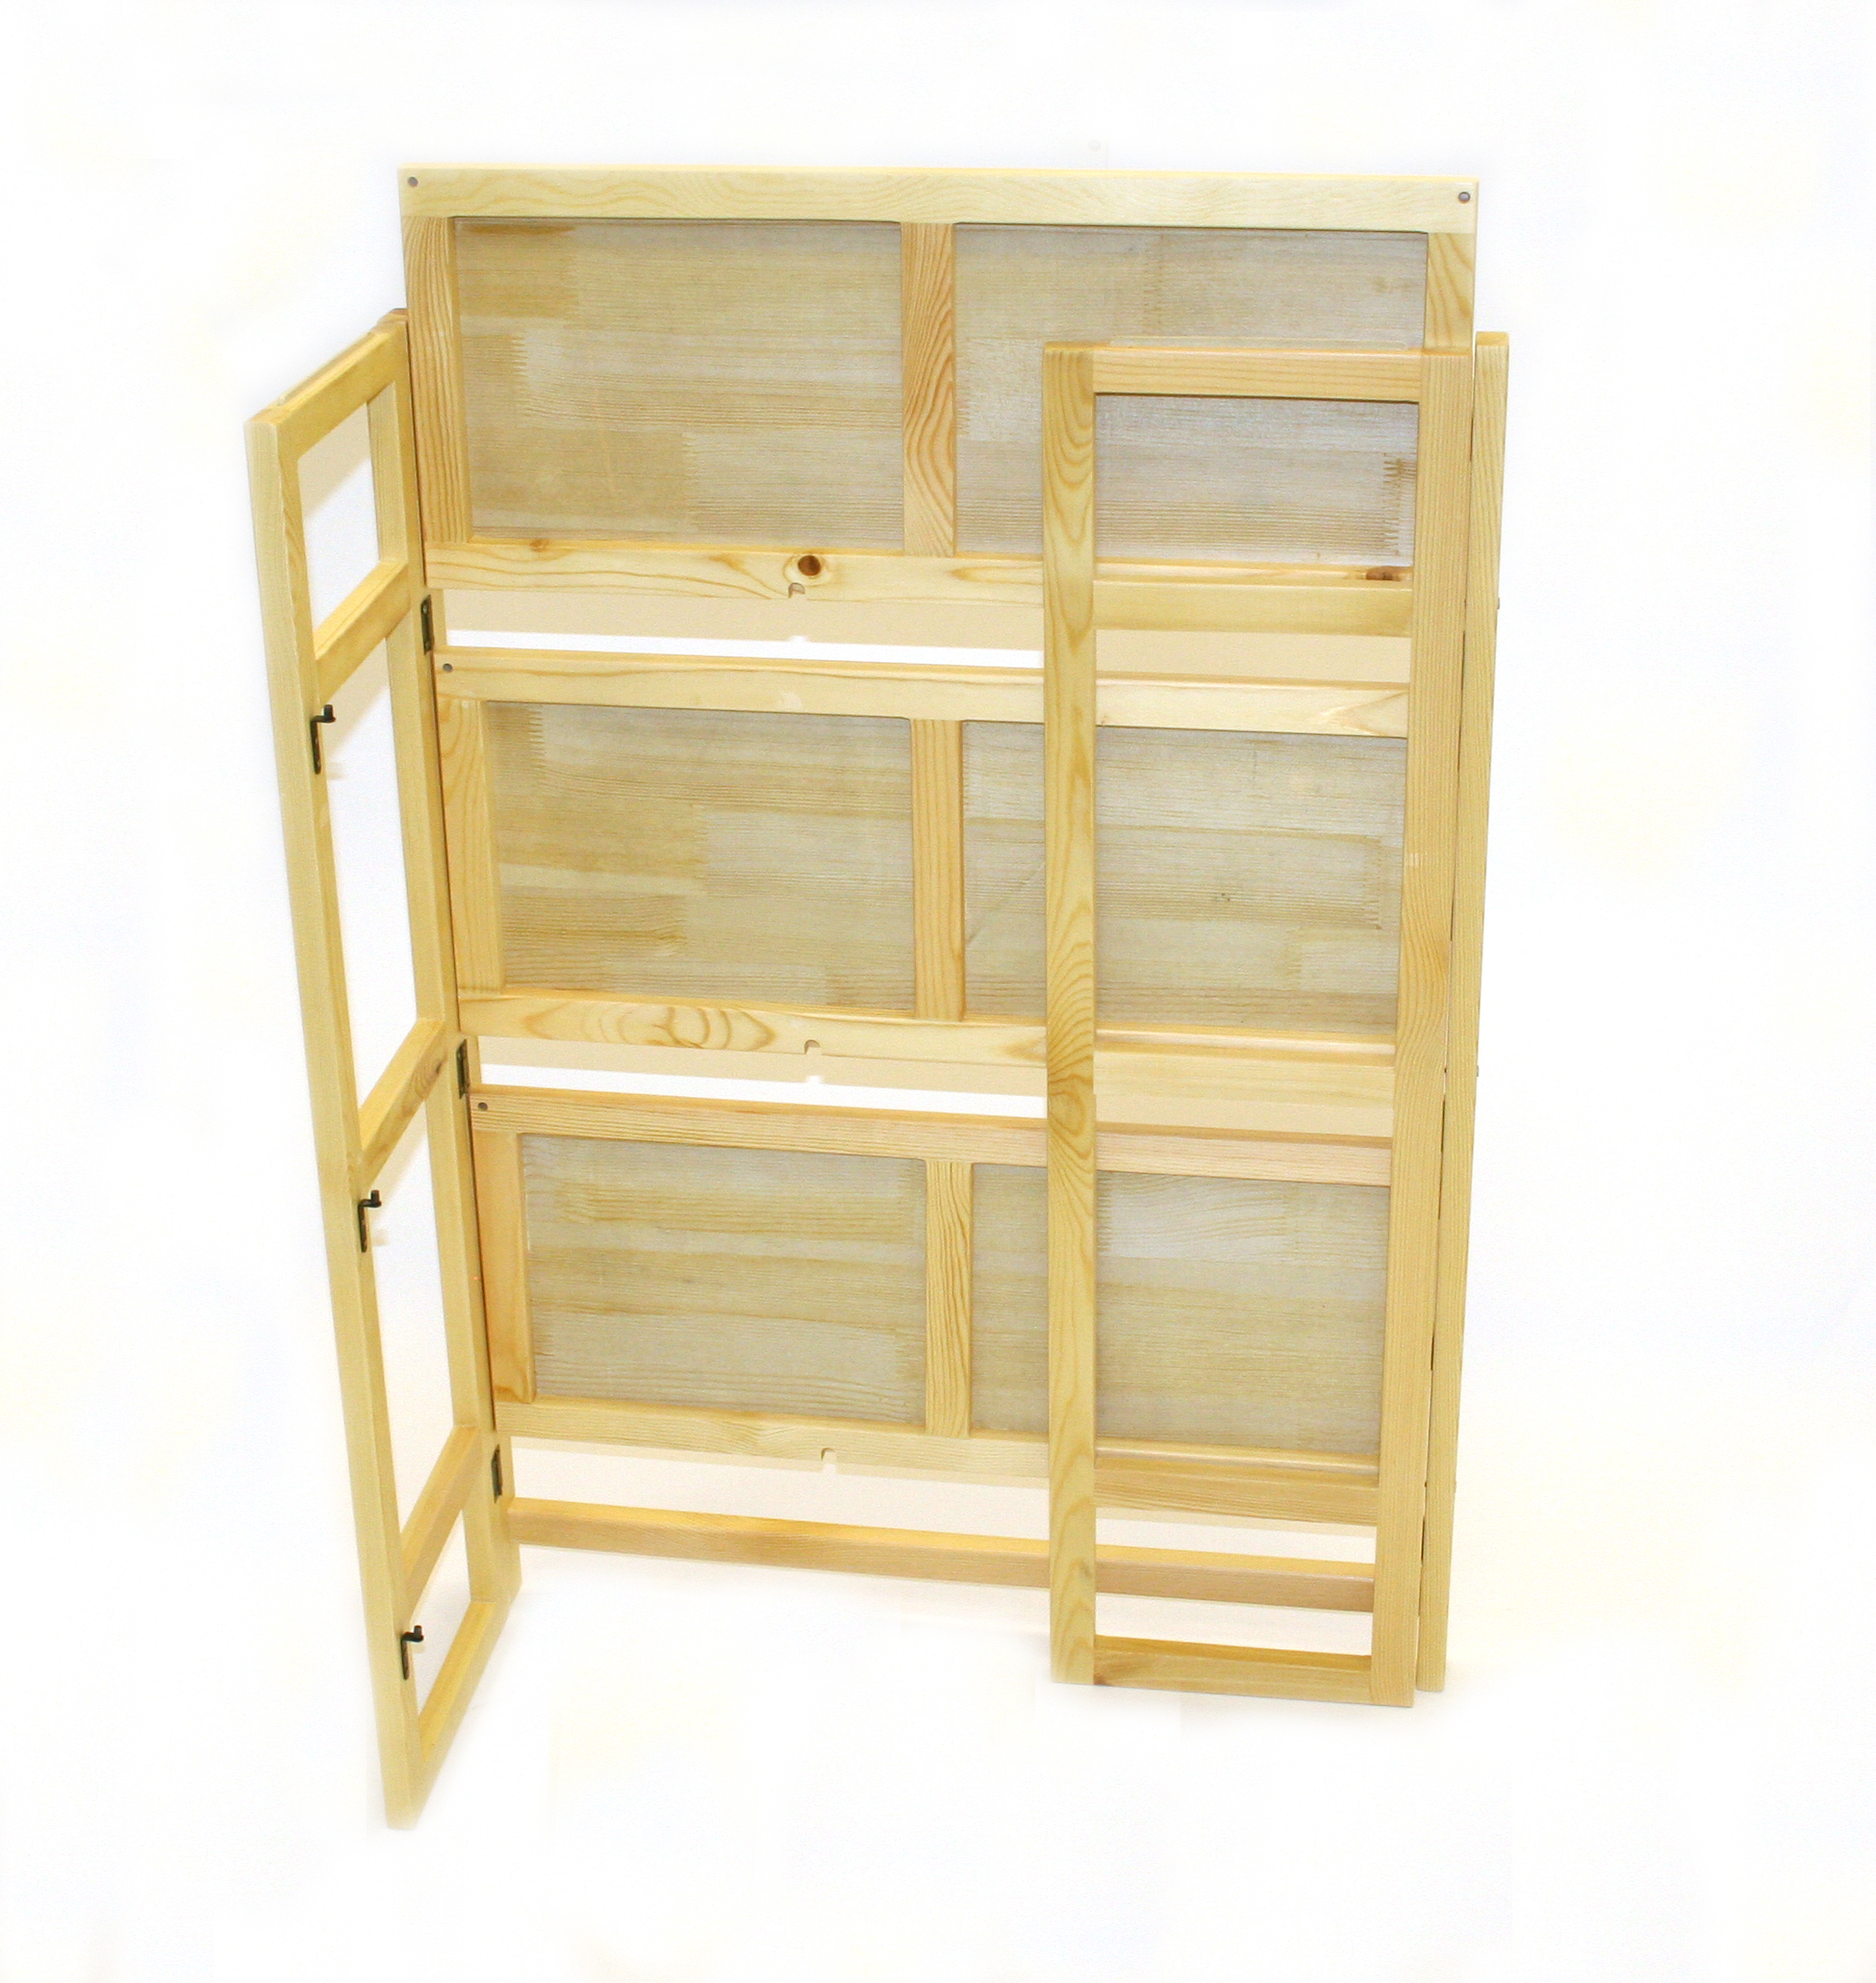 Stacking Wooden Bookshelves - BE Event Hire